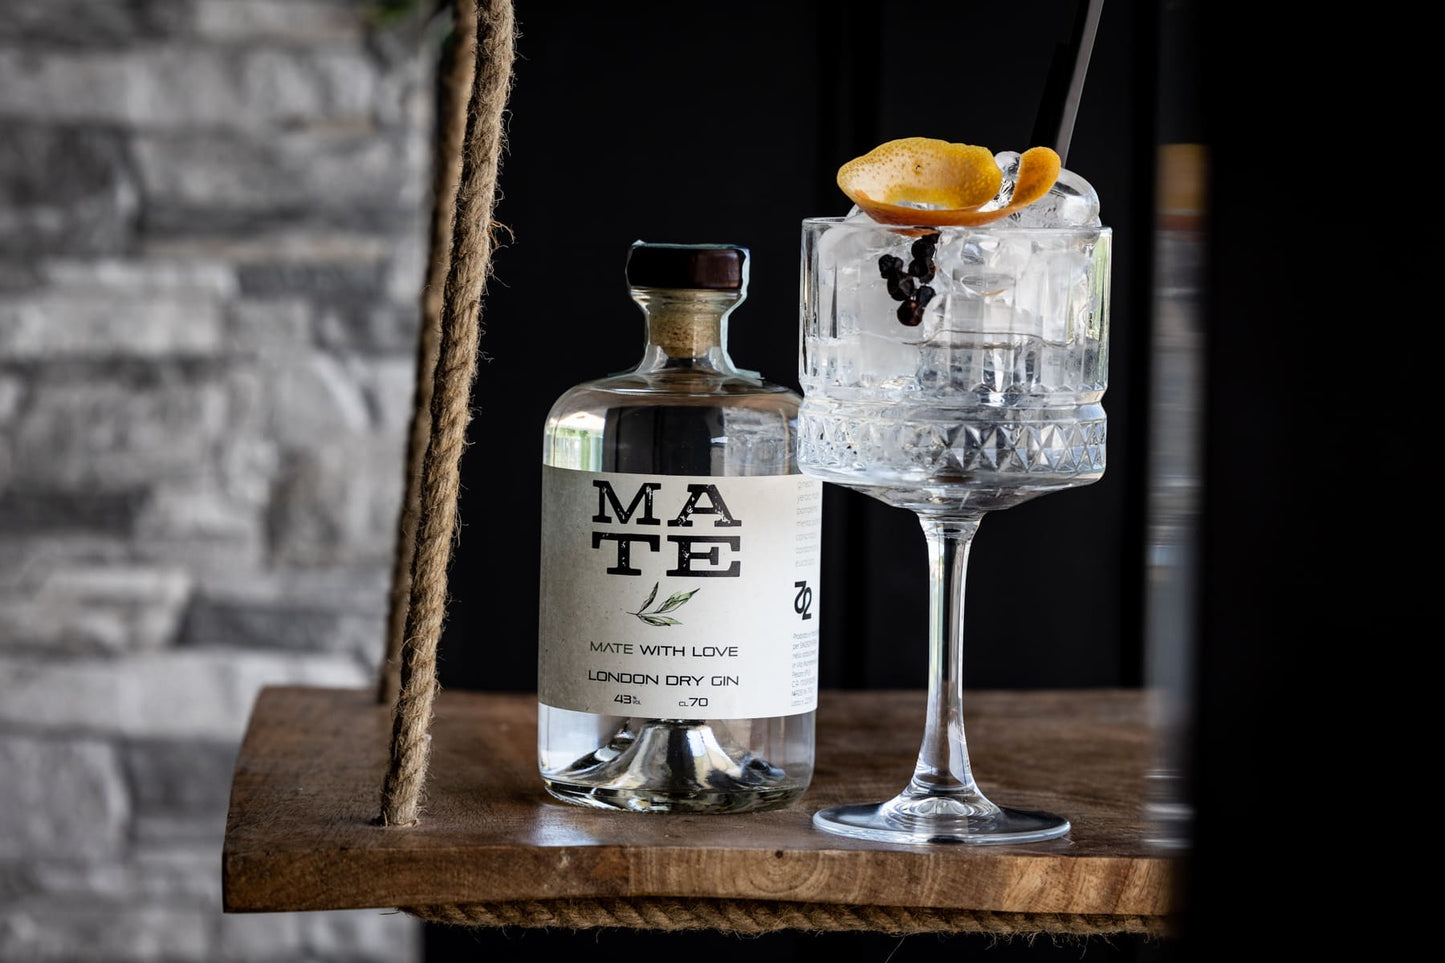 GIN MATE LONDON DRY - MATE CON AMOR 